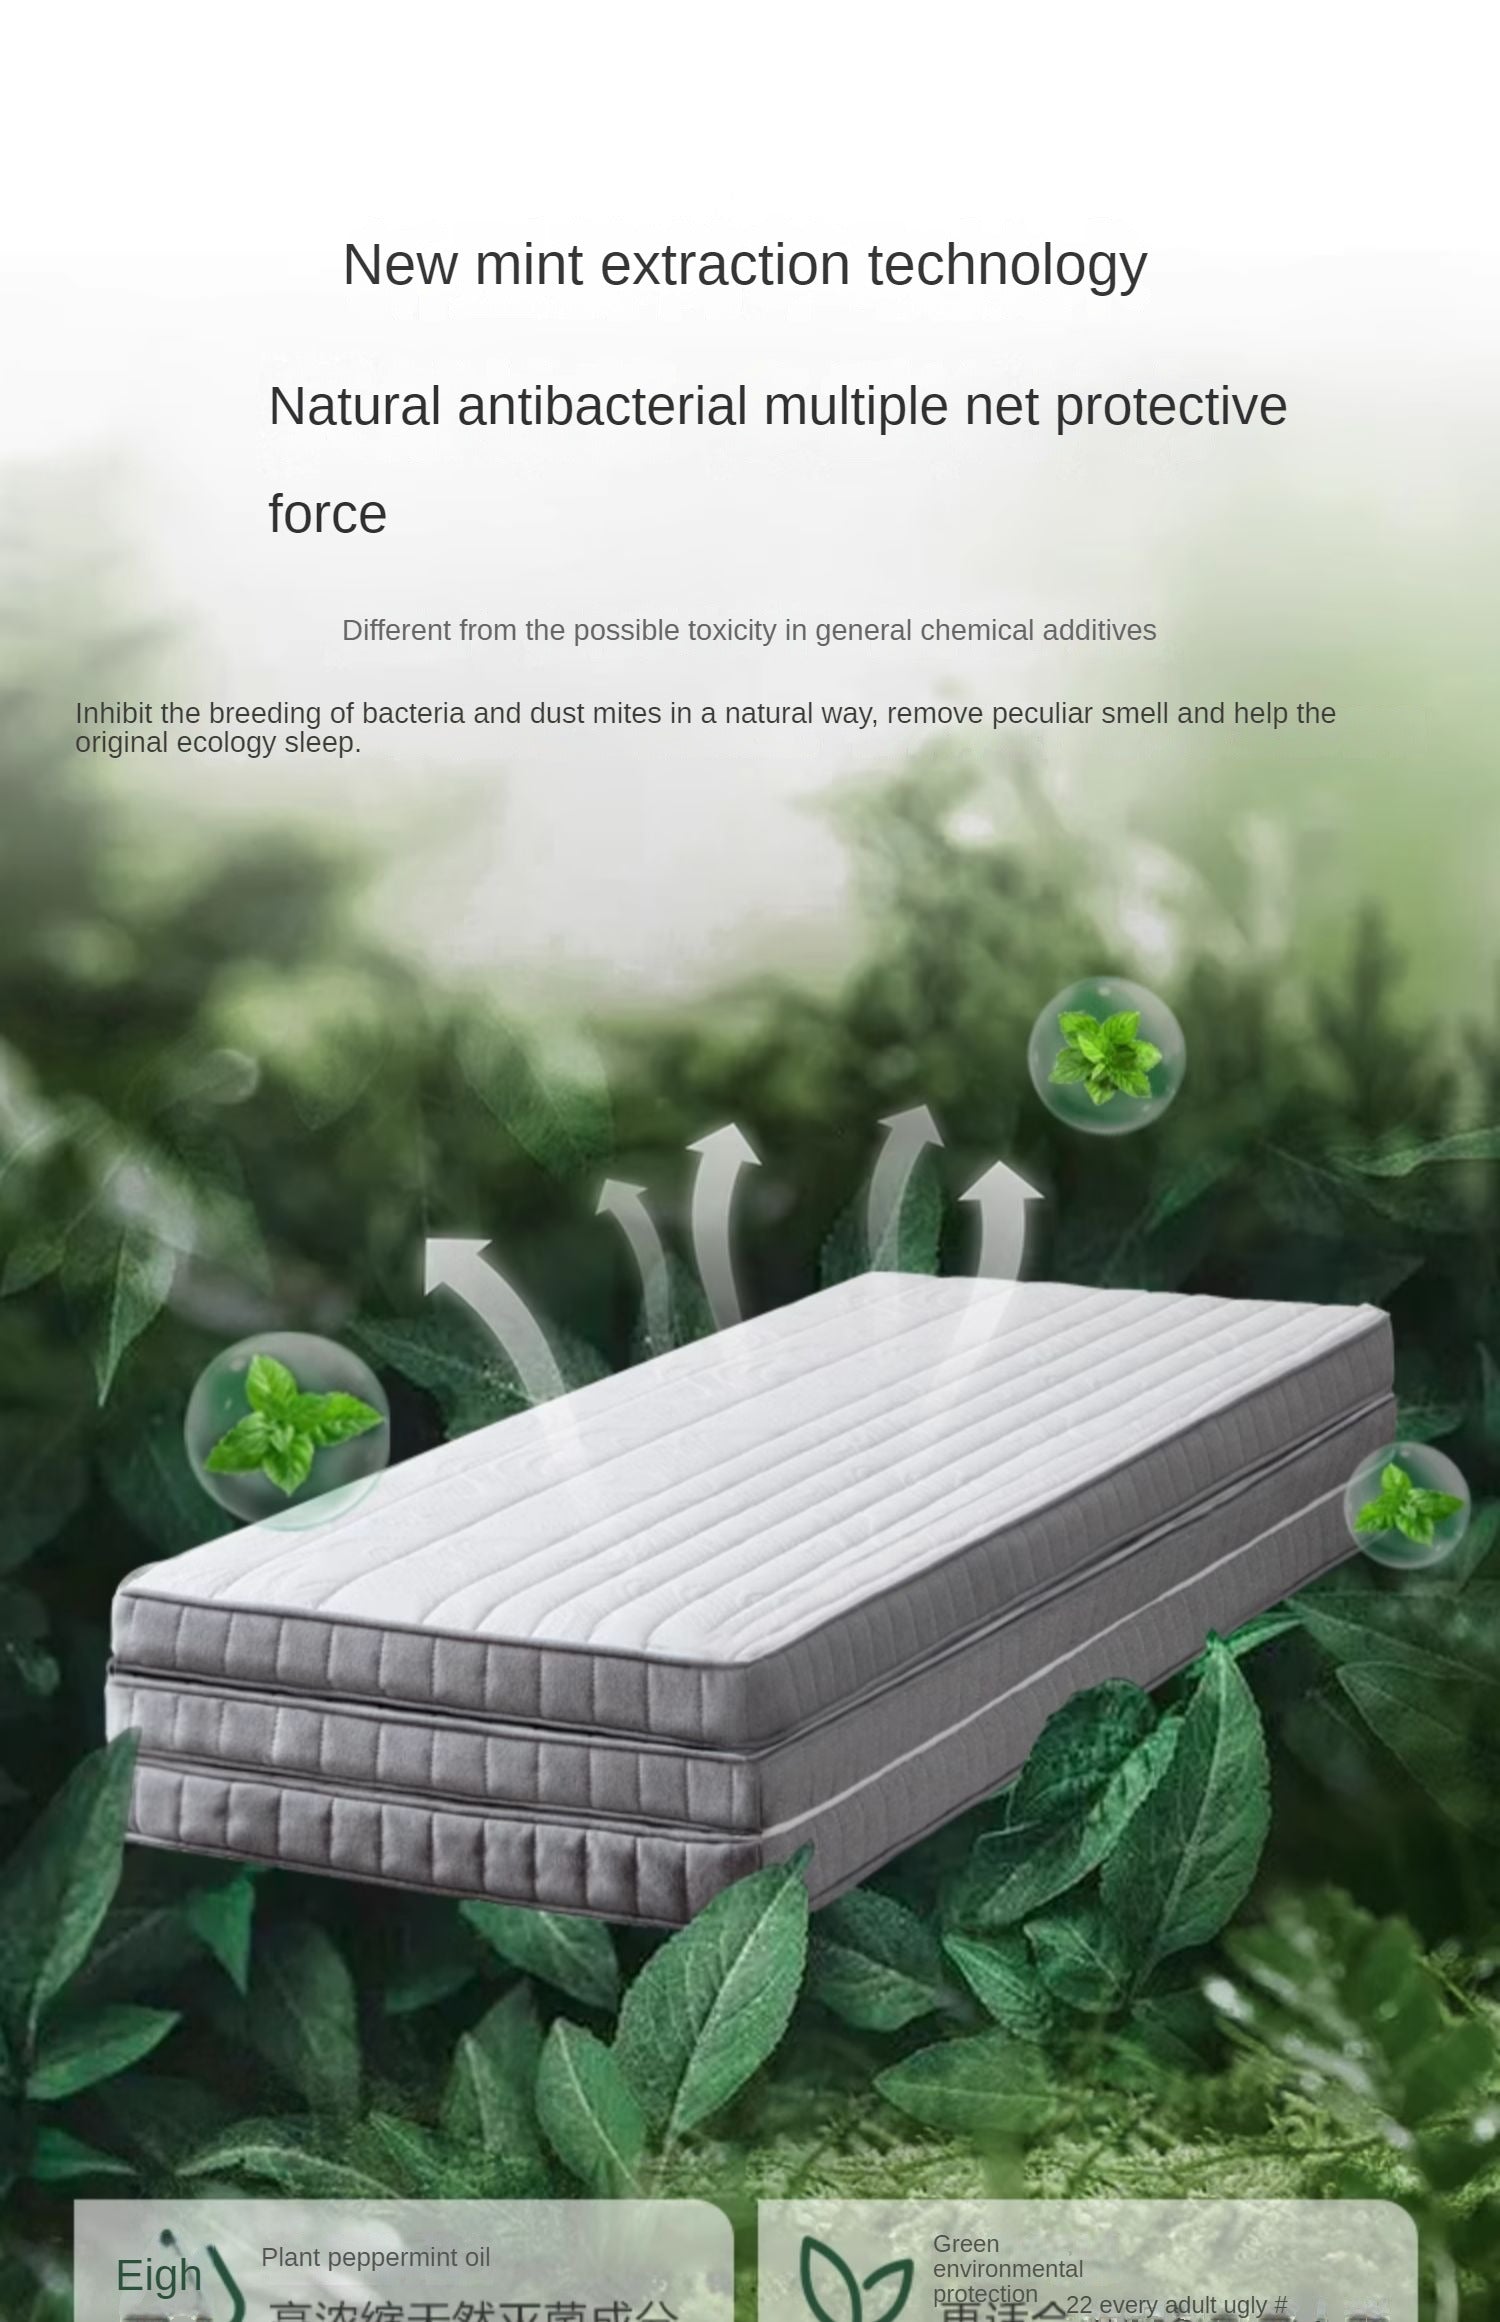 Coconut palm latex three-fold mattress with Spine Protection 8cm "